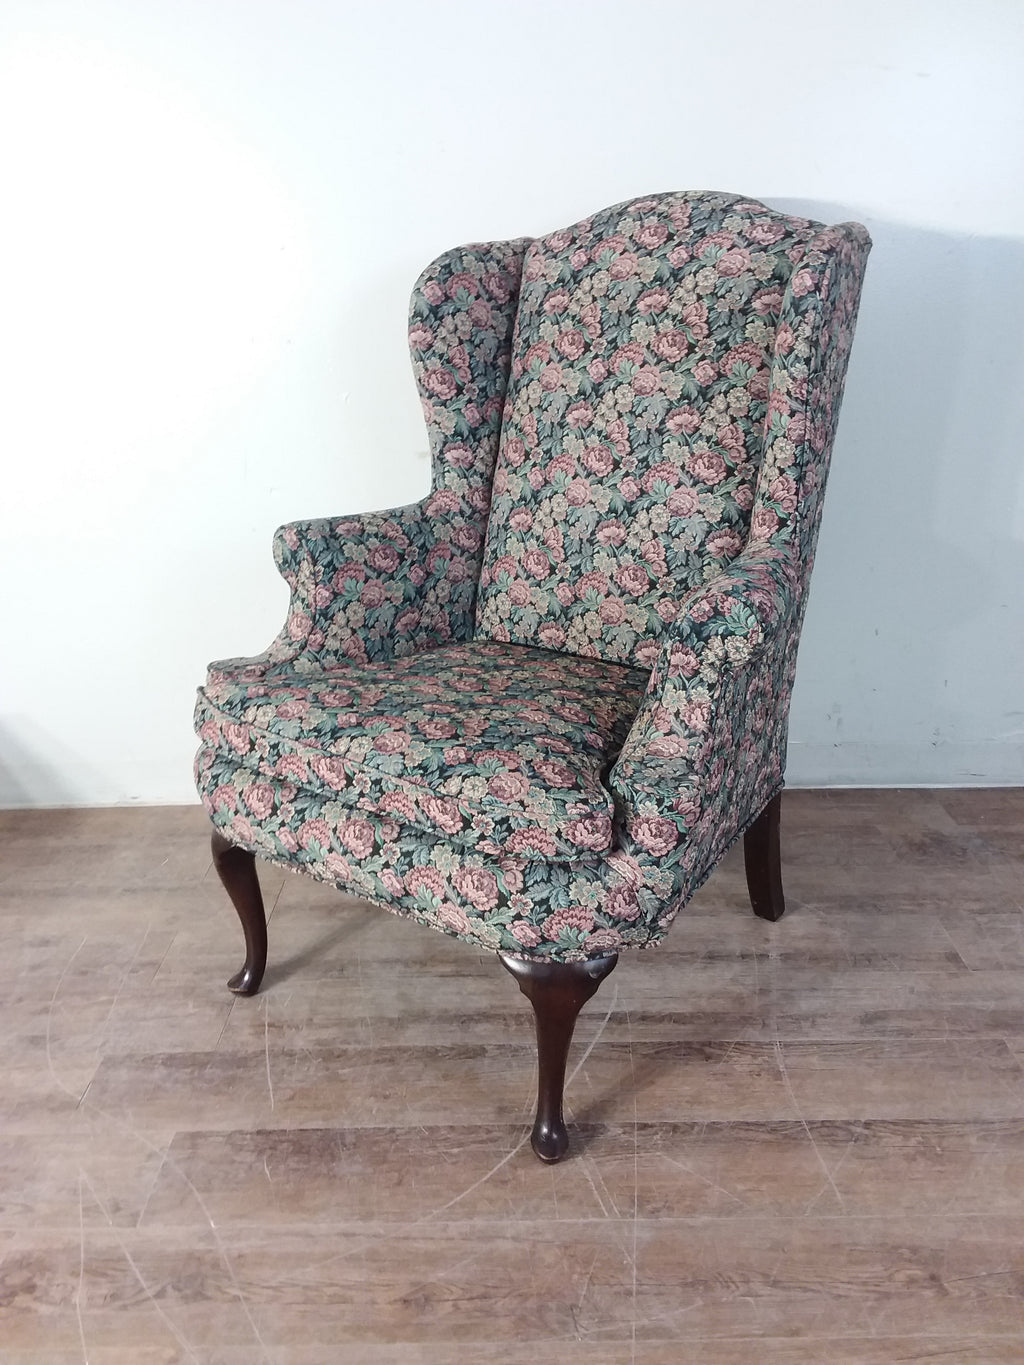 Floral Patterned Wing Chair